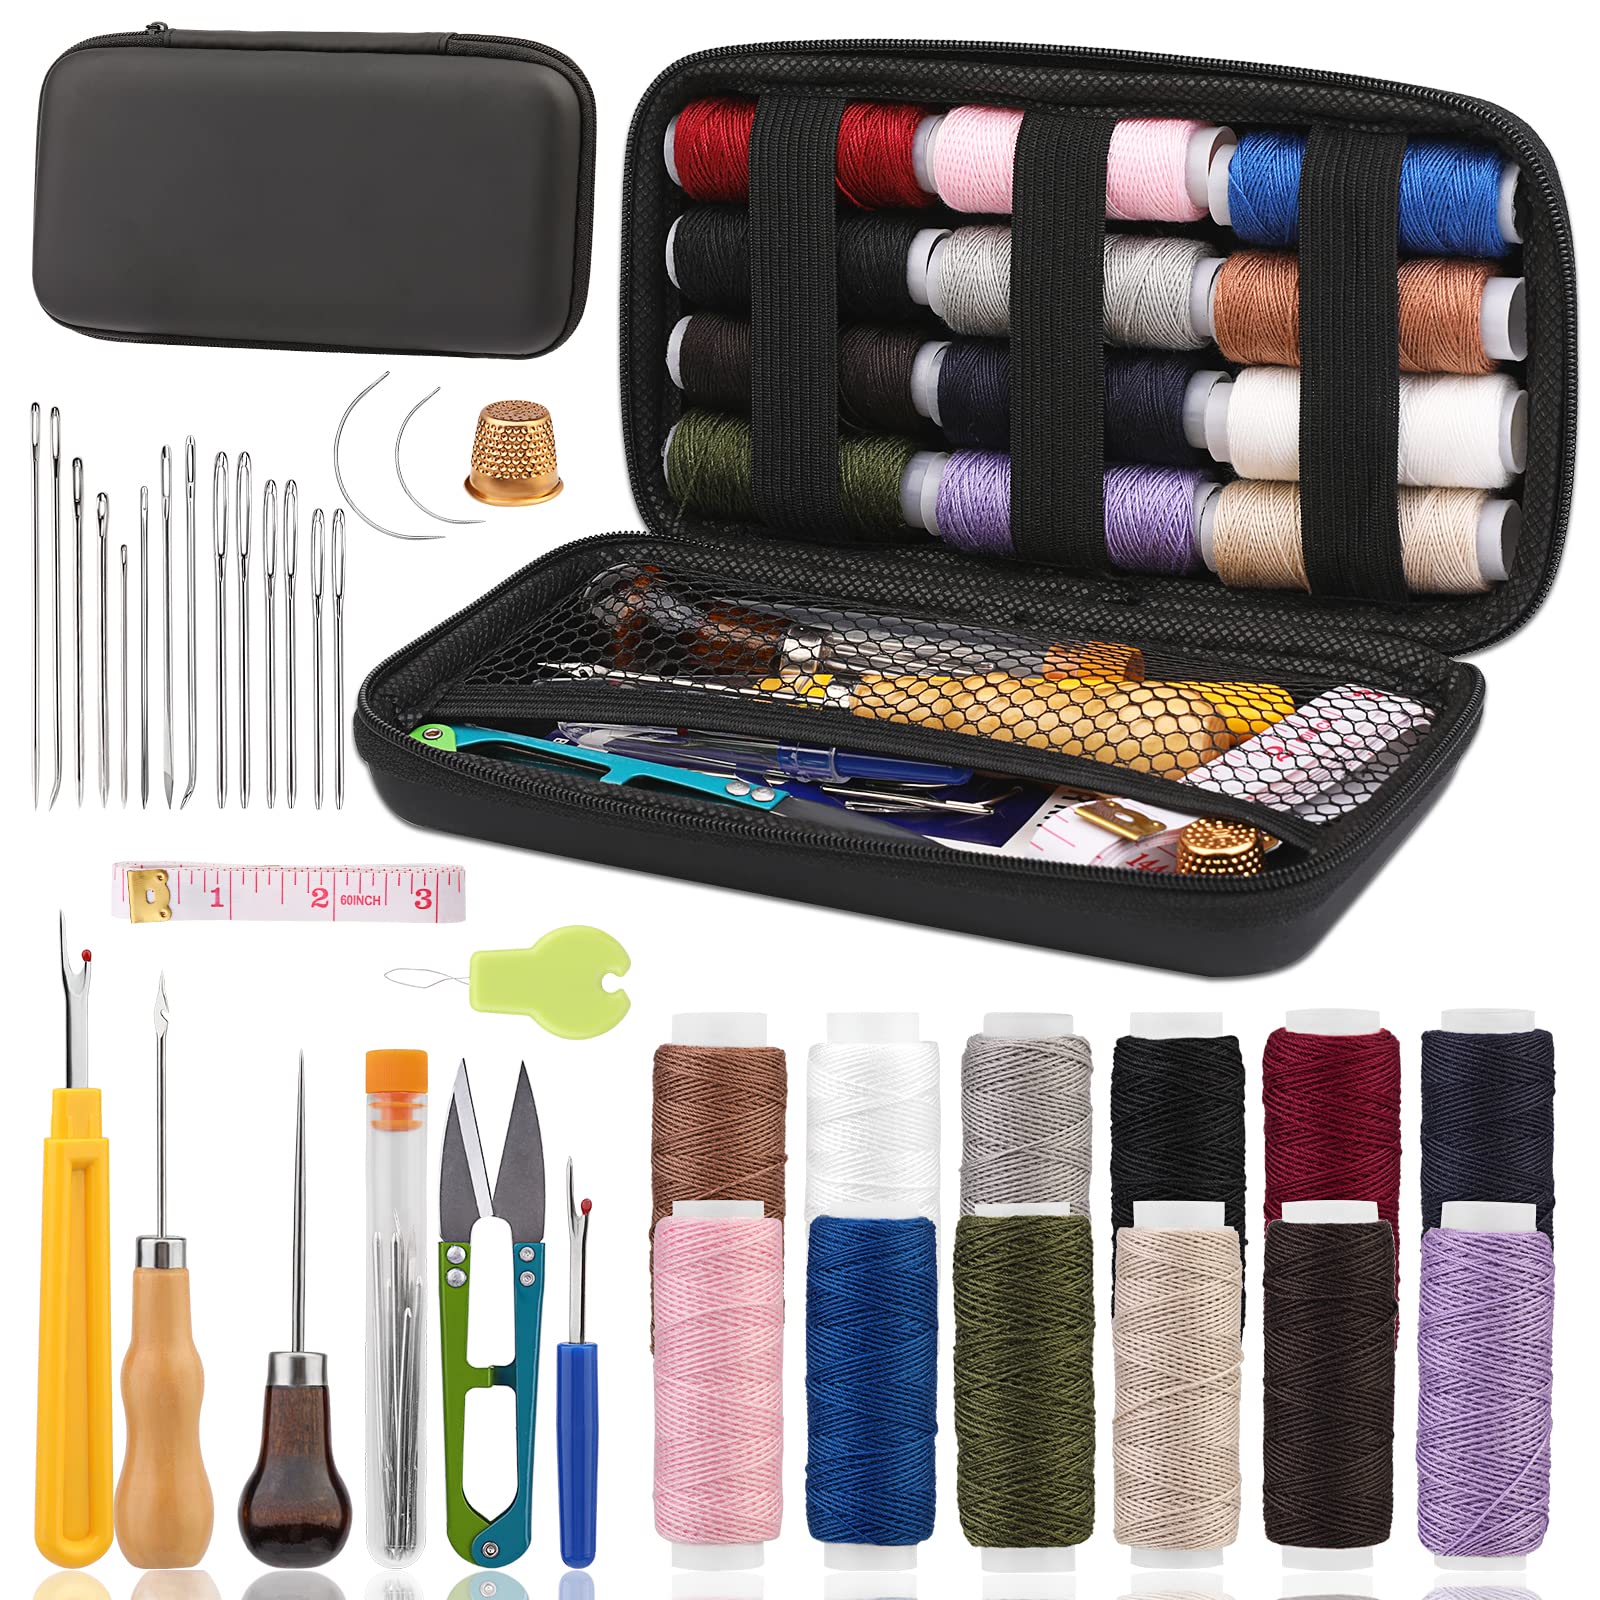  BAGERLA Upholstery Repair Kit, 48pcs Leather Sewing Kit with  Upholstery Thread, Sewing Awl, Seam Ripper, Needles, Thimble Leather Stitching  Kit for Carseat Carpet Shoes Backpack Repair DIY Crafting